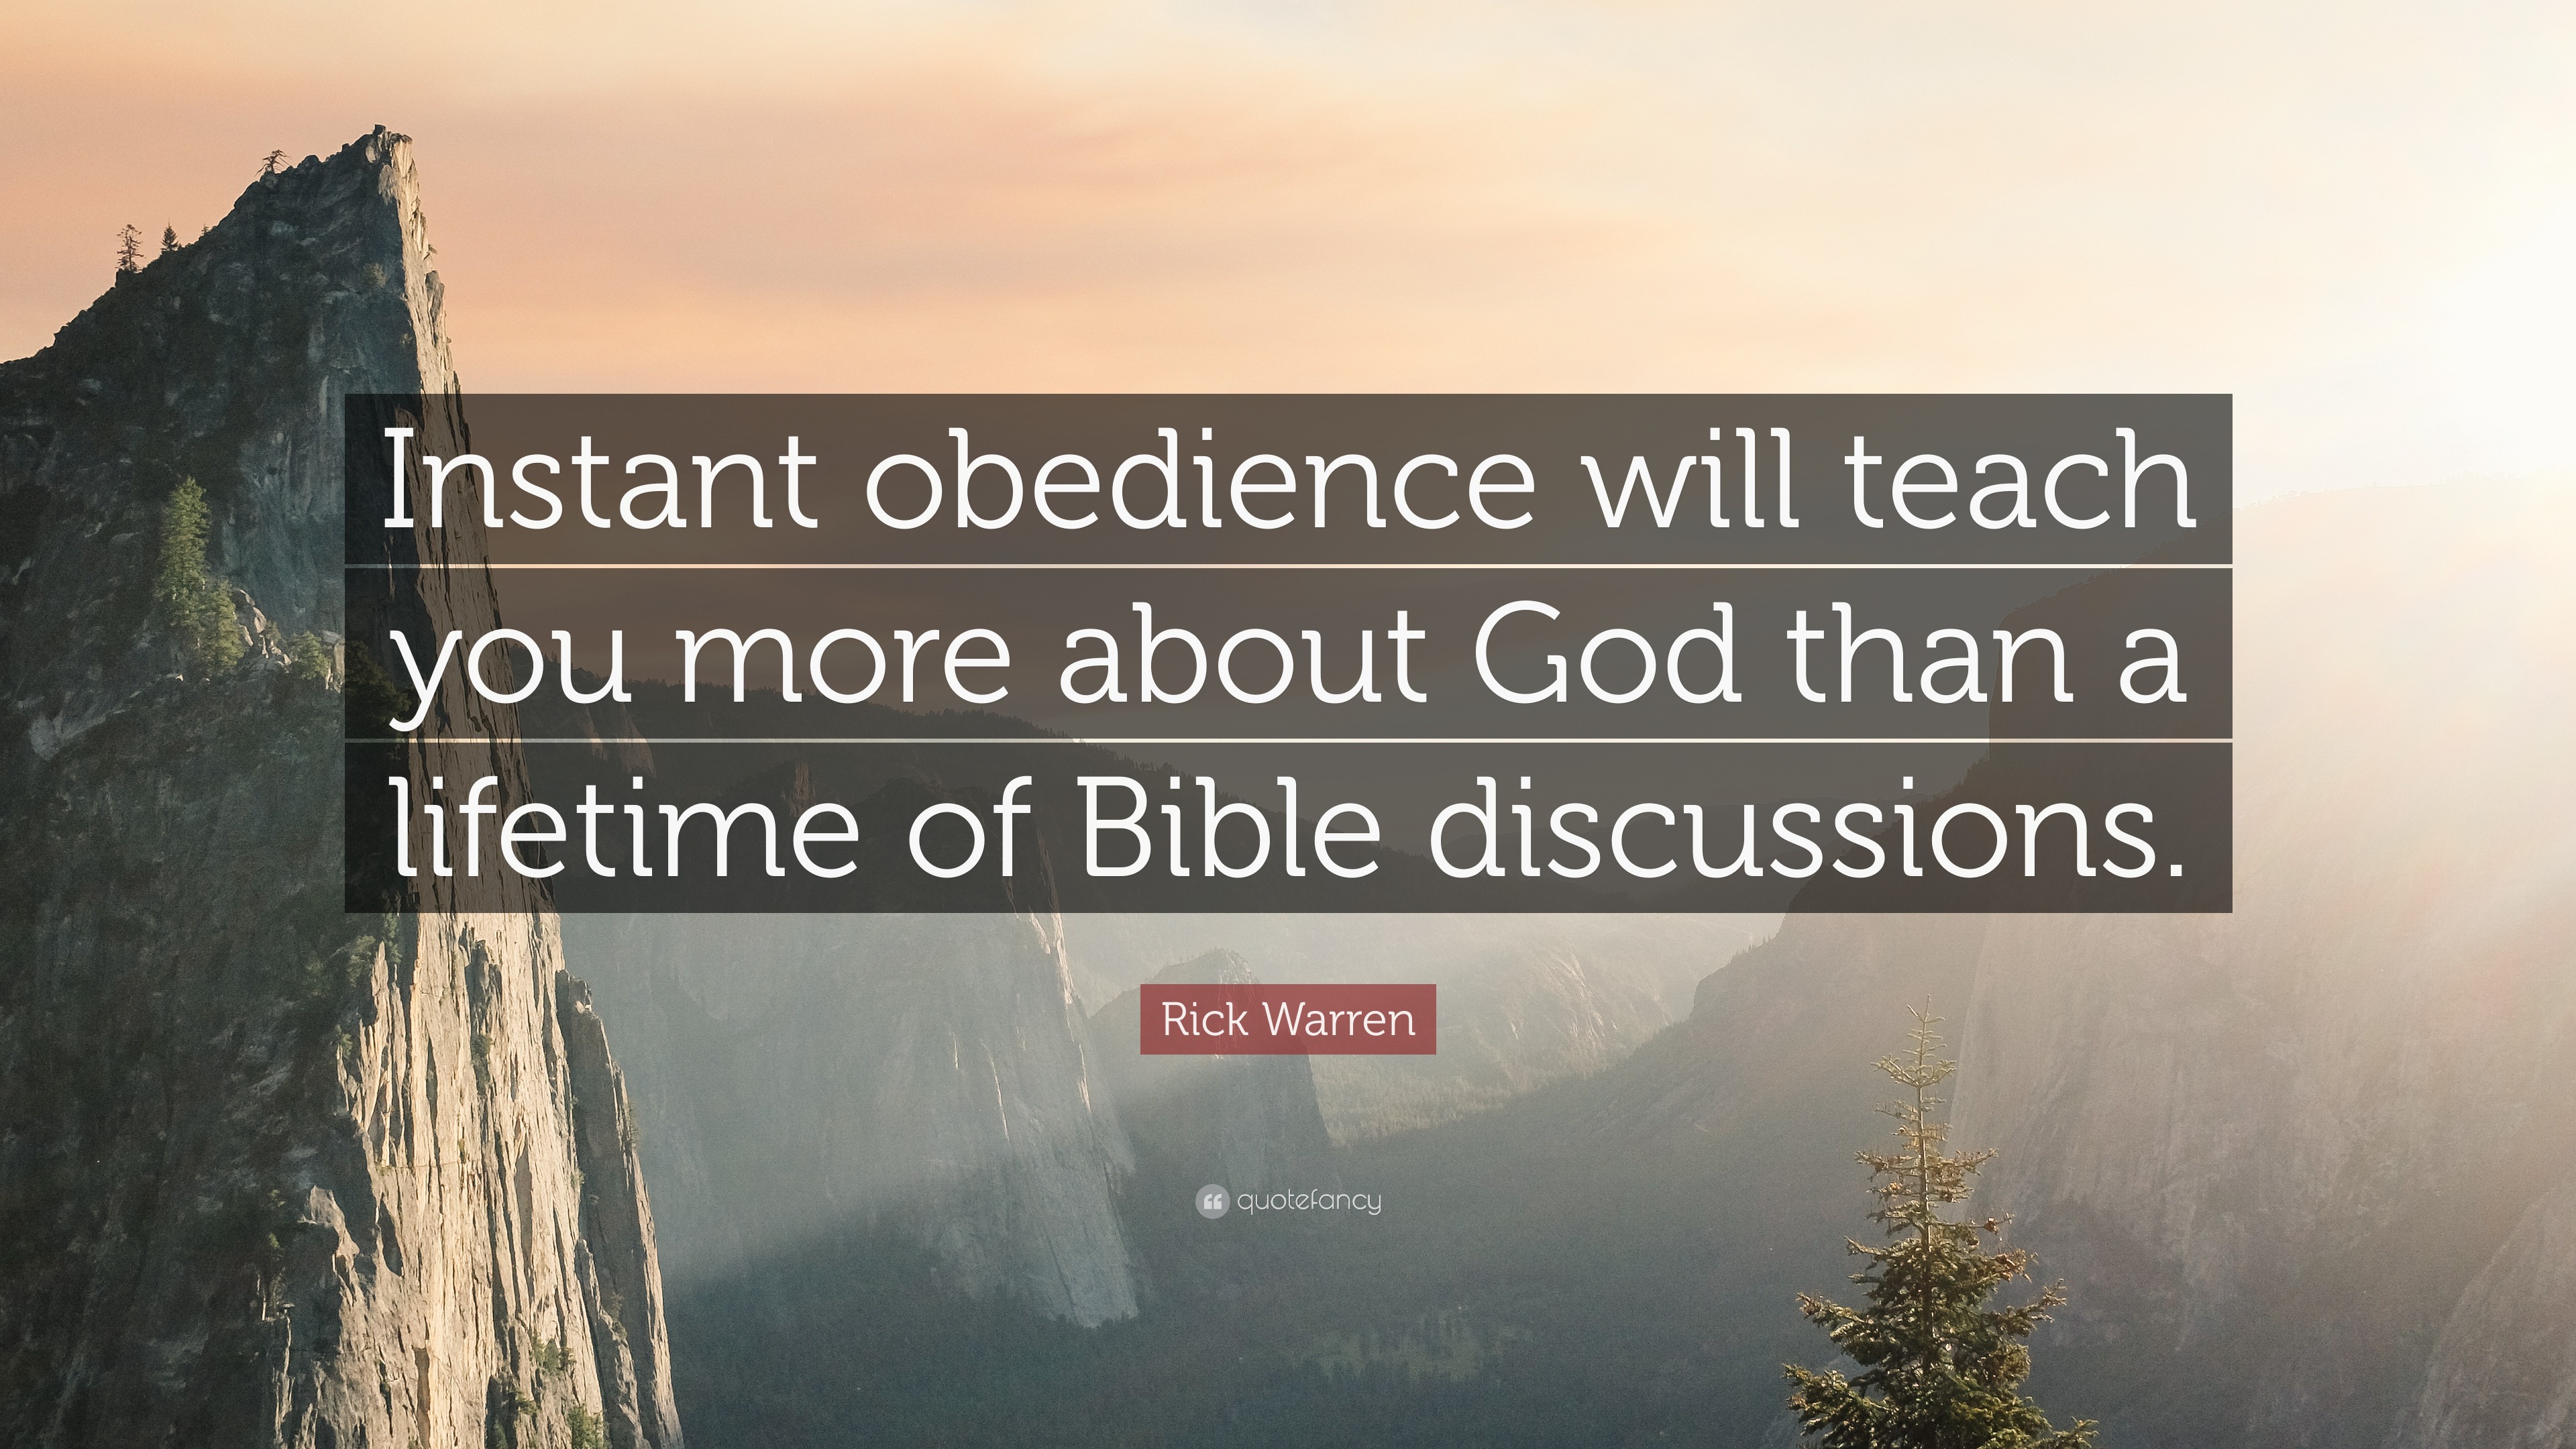 Rick Warren Quote: “Instant obedience will teach you more about God ...